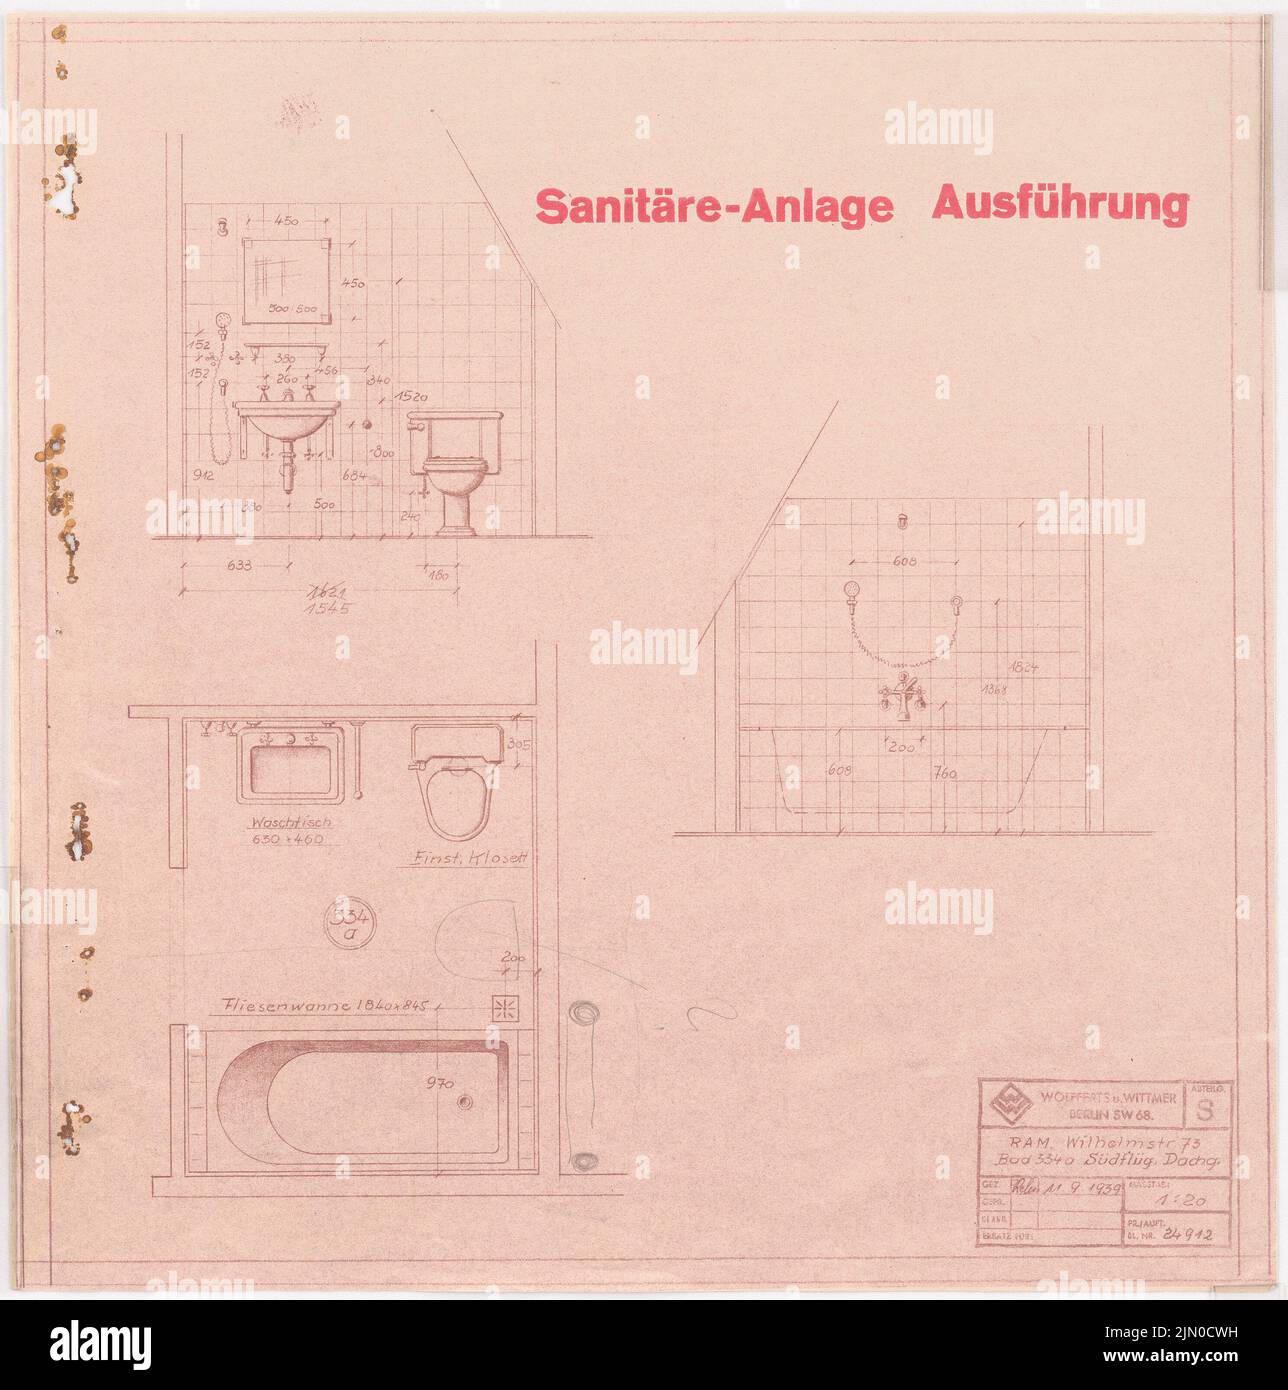 Böhmer Franz (1907-1943), official apartment of the Reich Foreign Minister Joachim von Ribbentrop in Berlin-Mitte (11.09.1939): Sanitary facility in the attic south wing: floor plan, views 1:20. Light break on paper, 38.3 x 37.9 cm (including scan edges) Böhmer & Petrich : Dienstwohnung des Reichsaußenministers Joachim von Ribbentrop, Berlin-Mitte. Umbau Stock Photo